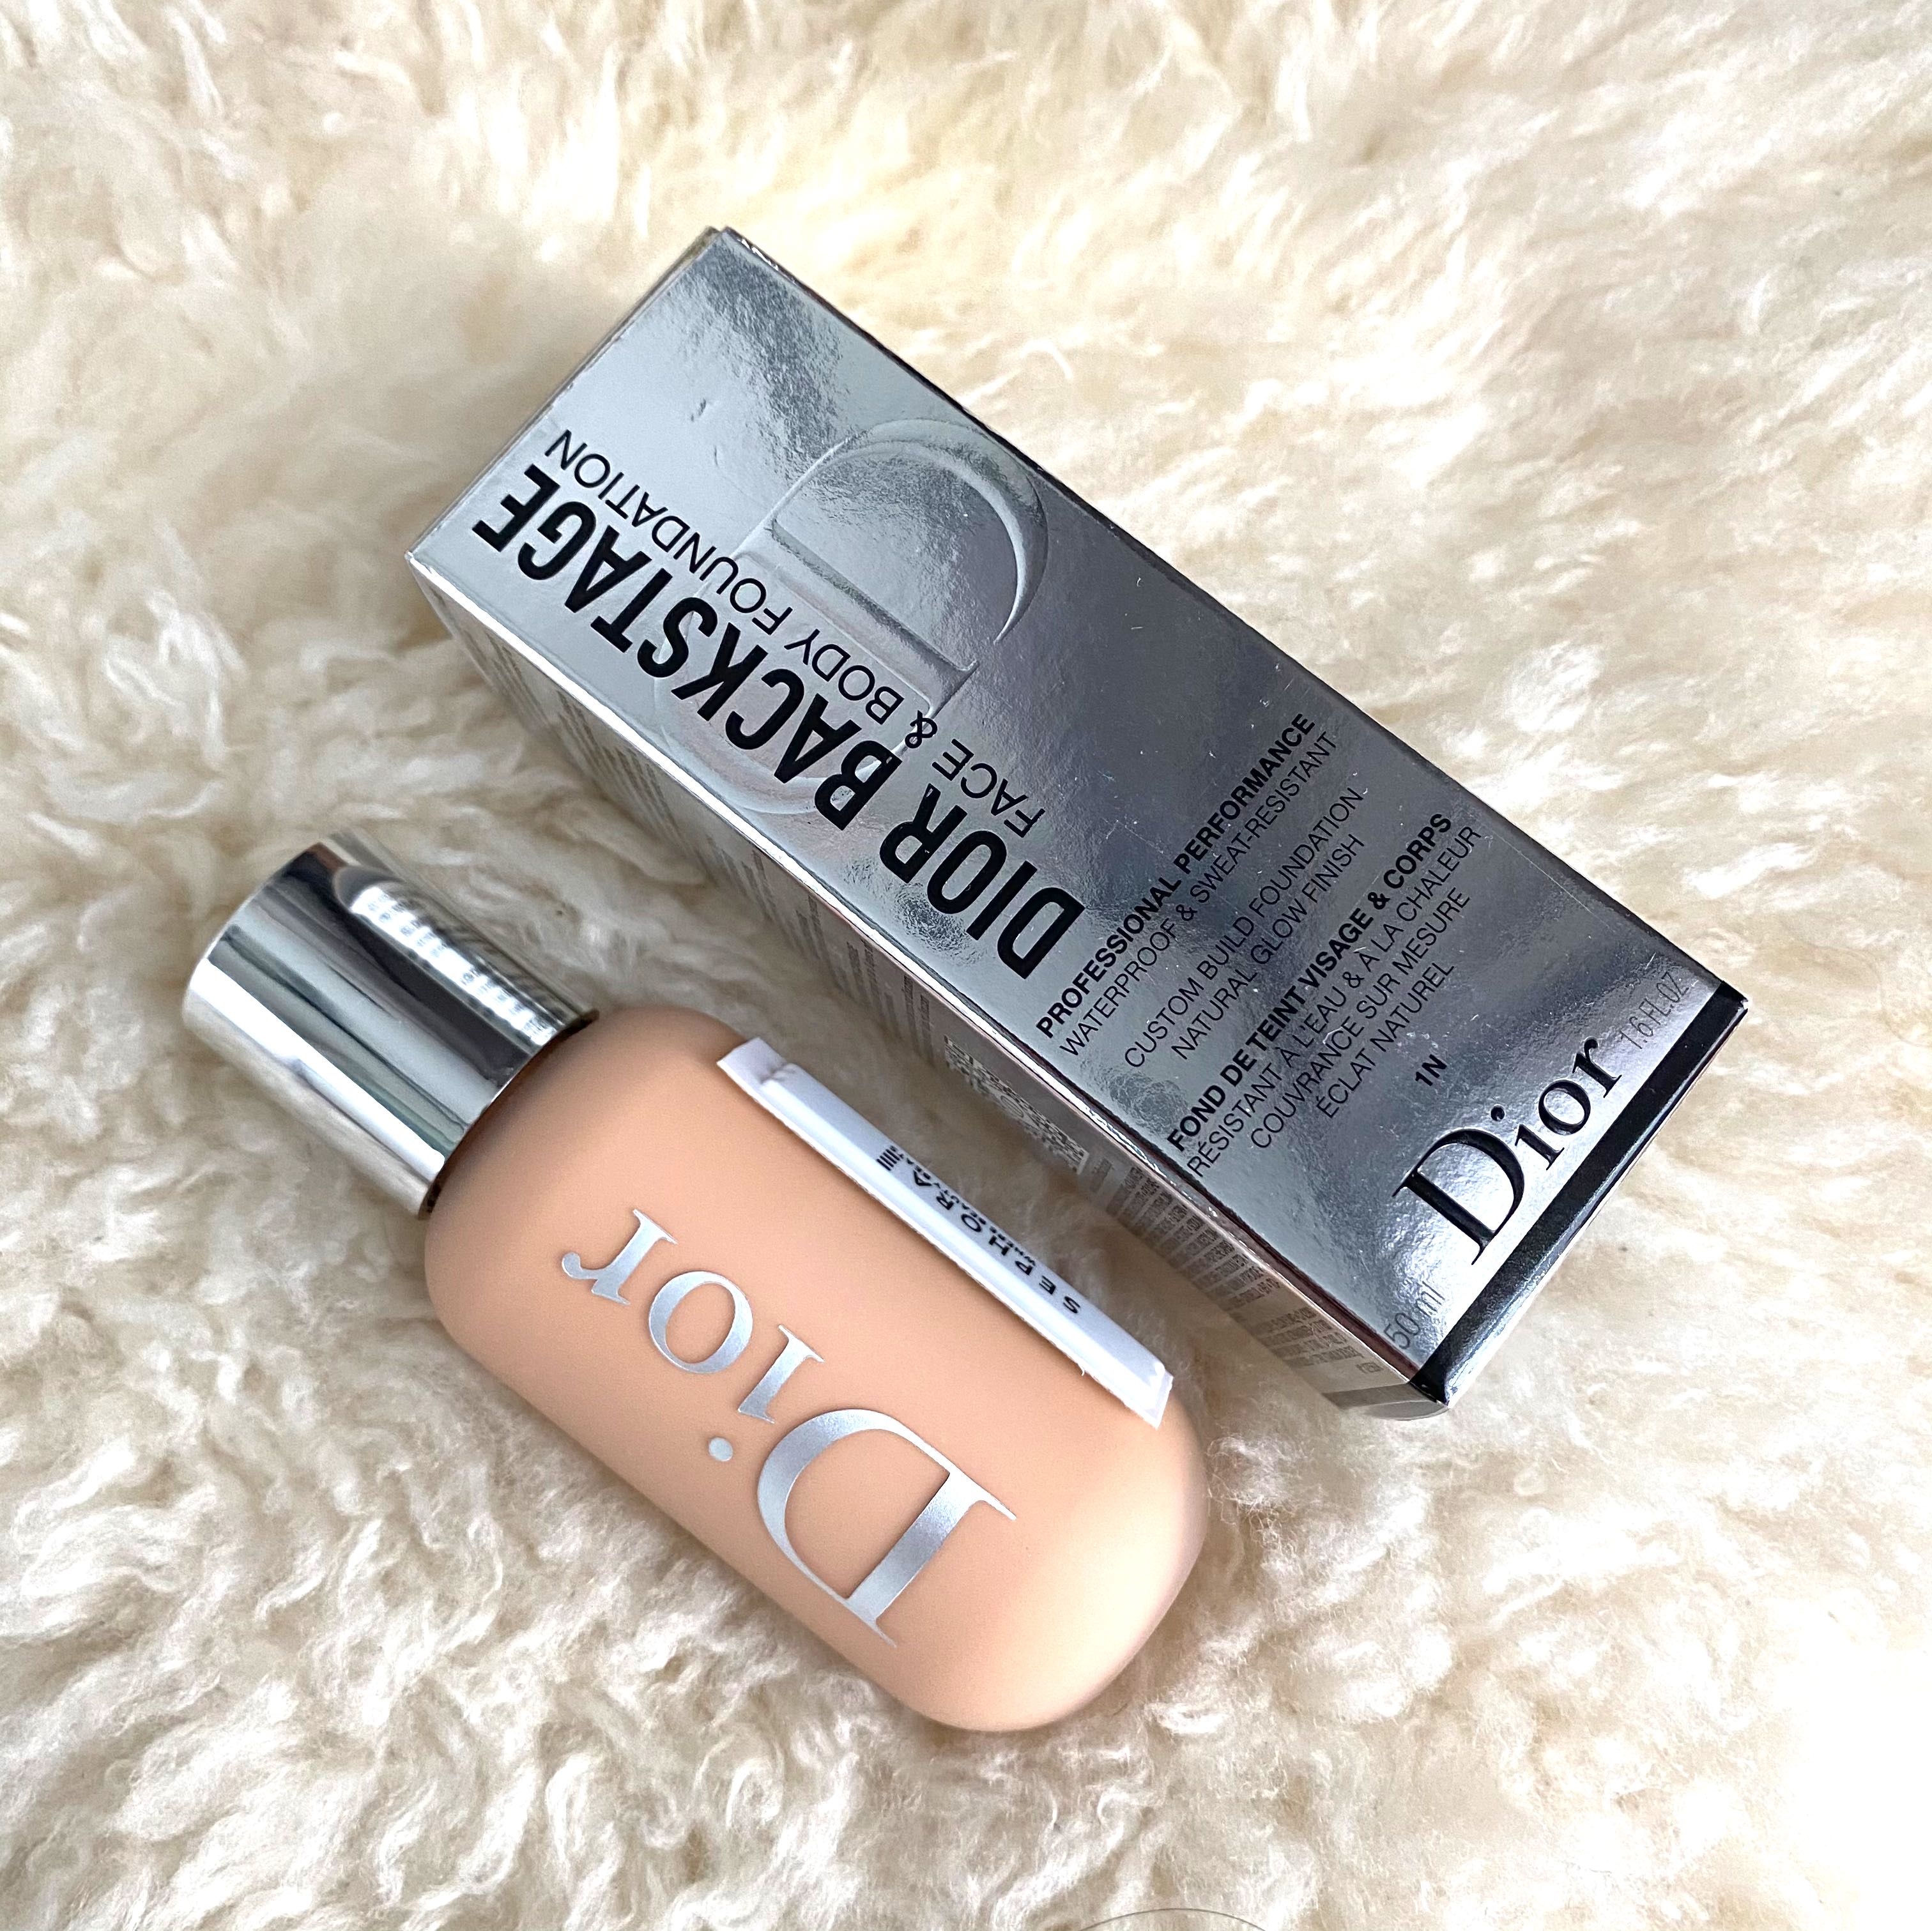 dior face and body foundation 1n